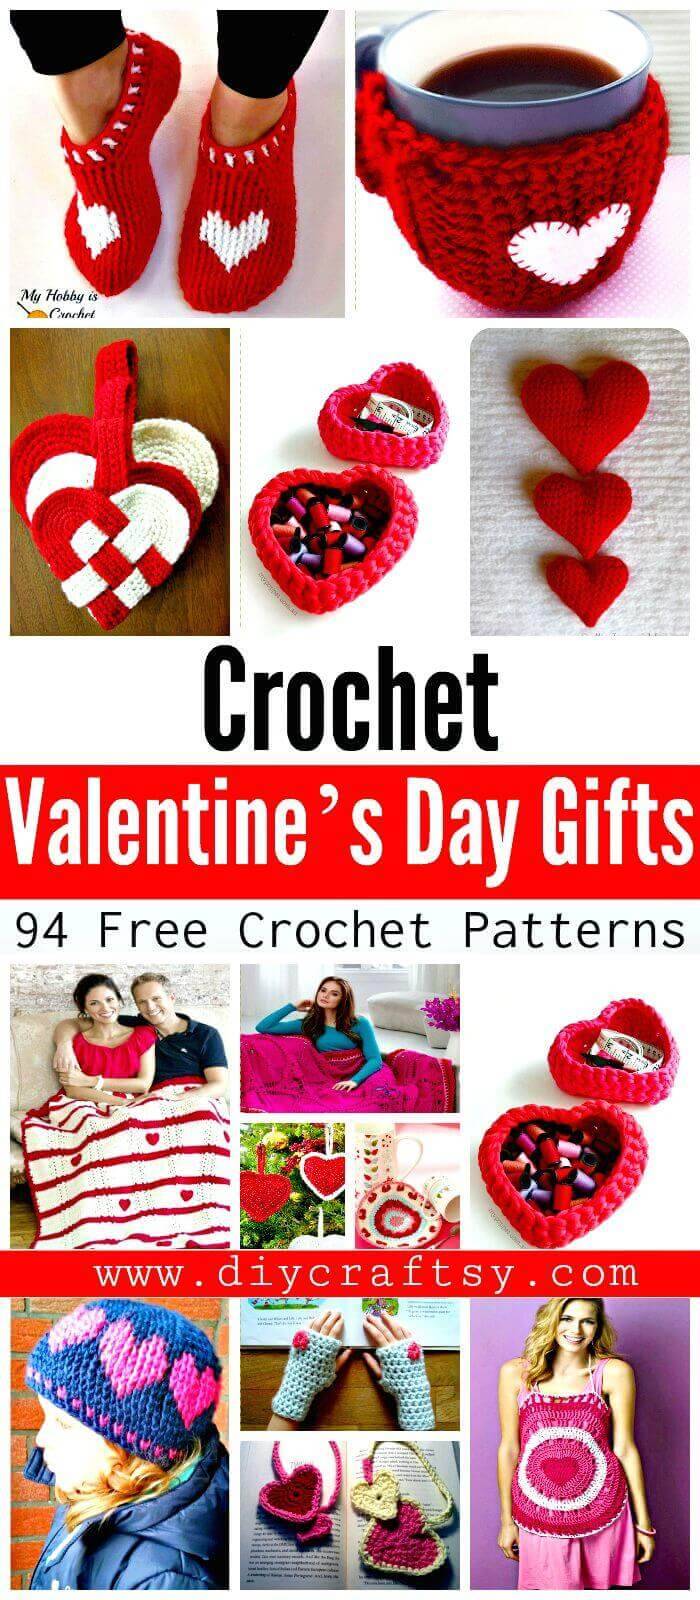 Free Crochet Patterns for Valentine’s Day Gifts - DIY Crafts